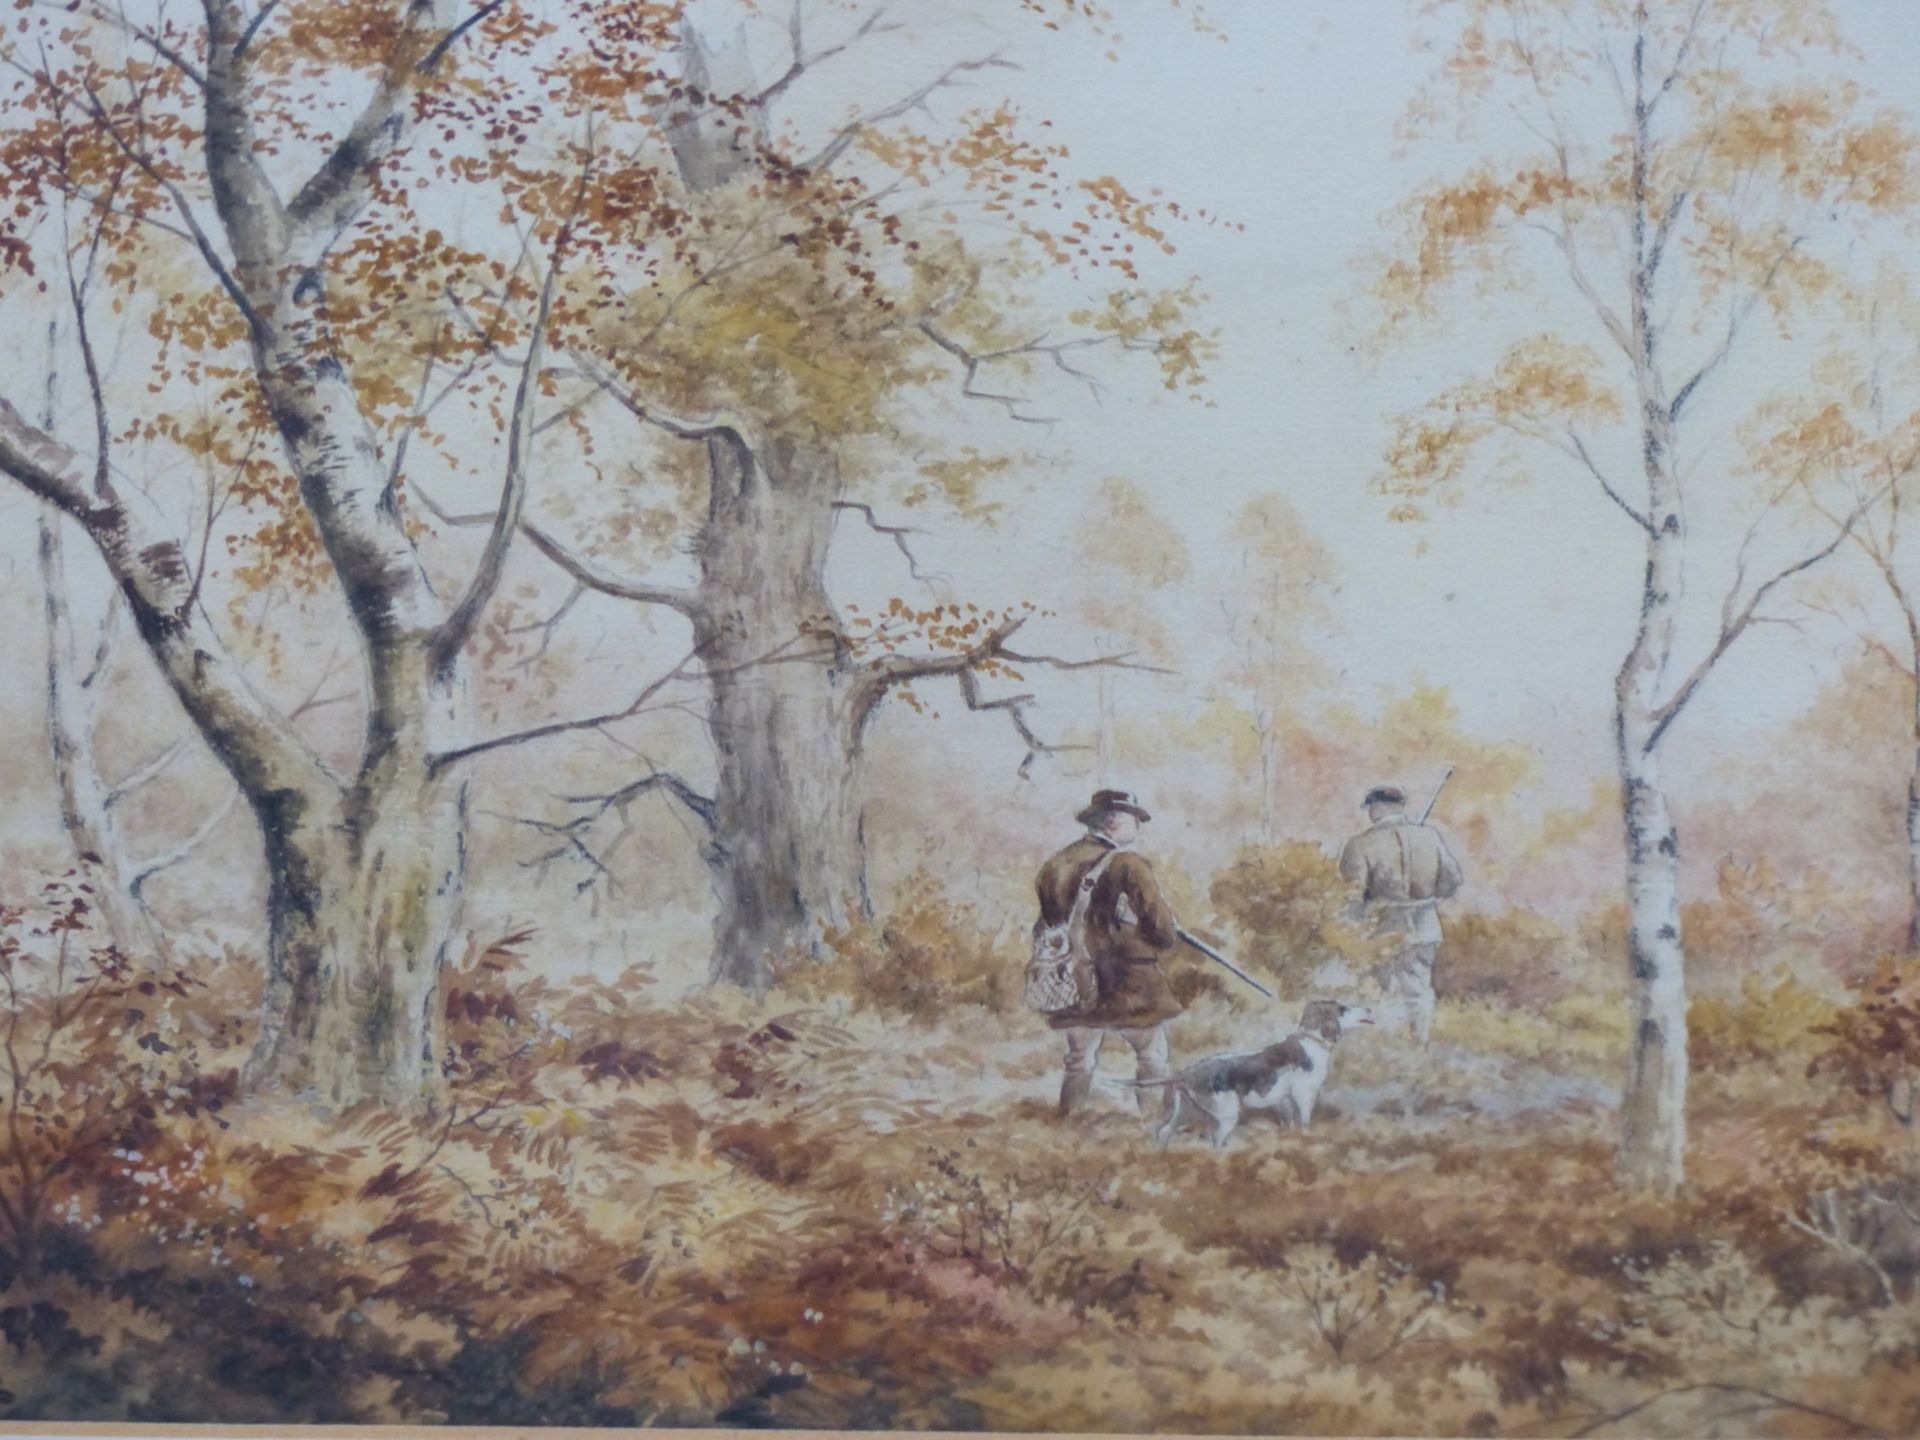 J. HALFORD ROSS. (19TH CENTURY) SPORTSMEN AND DOGS IN WOODLAND, WATERCOLOUR..37 X 25 cm.